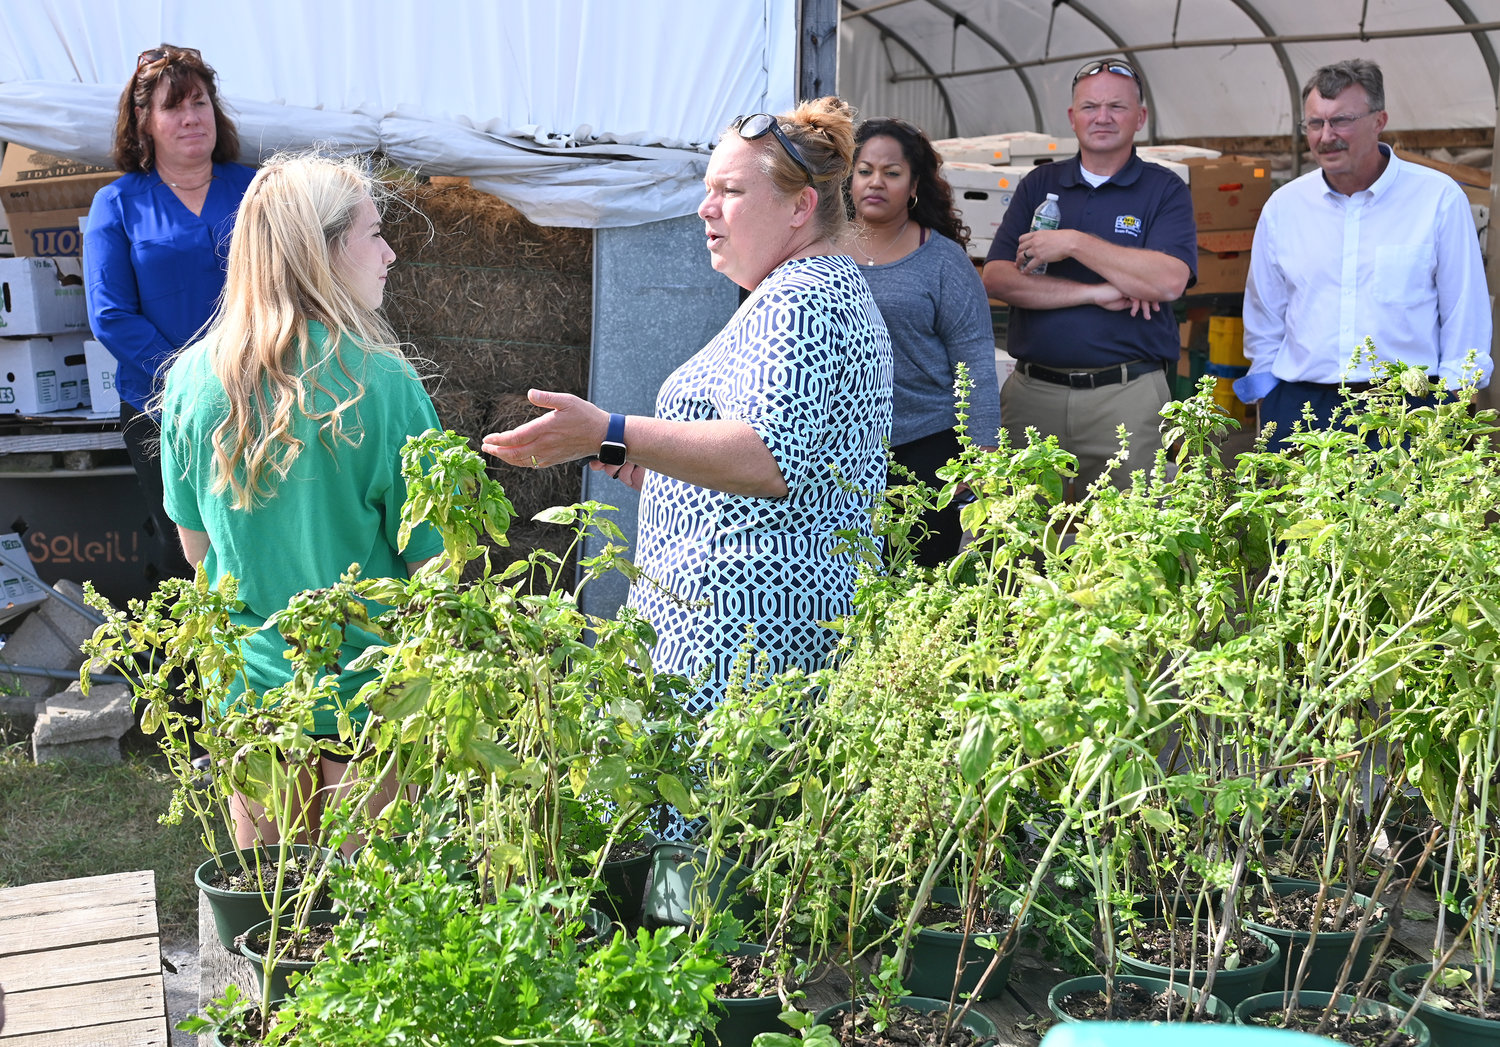 FARM TALK — Shawna Candella Papale and her daughter, Sara, talk with the group of state Assembly members, including Marianne Buttenschon, D-119, Marcy, about their farm and business, Candella’s Farm and Greenhouses, 9256 River Road in Marcy, on Tuesday. Buttenschon hosted a tour of six local farms in the Mohawk Valley for several fellow Assembly members, including Aileen Gunther, D. Billy Jones, Jen Lunsford, Jaime Williams, Catalina Cruz, Agricultural Committee Chairperson Donna Lupardo, and Brian Miller, R-101, New Hartford, for visiting some of the great farmers and business leaders in the 119th District,’’ Buttenschon said, and to help educate and inform them on issues facing the agricultural industry in her district and across New York. In addition to Candella’s, the tour also made stops at R. Jones Nursery and Landscaping Center in Rome; DiNitto Farms, Sciortino Farms and Buttenschon Tree Farm in Marcy; and the Collins Farm Creamery in Rome.